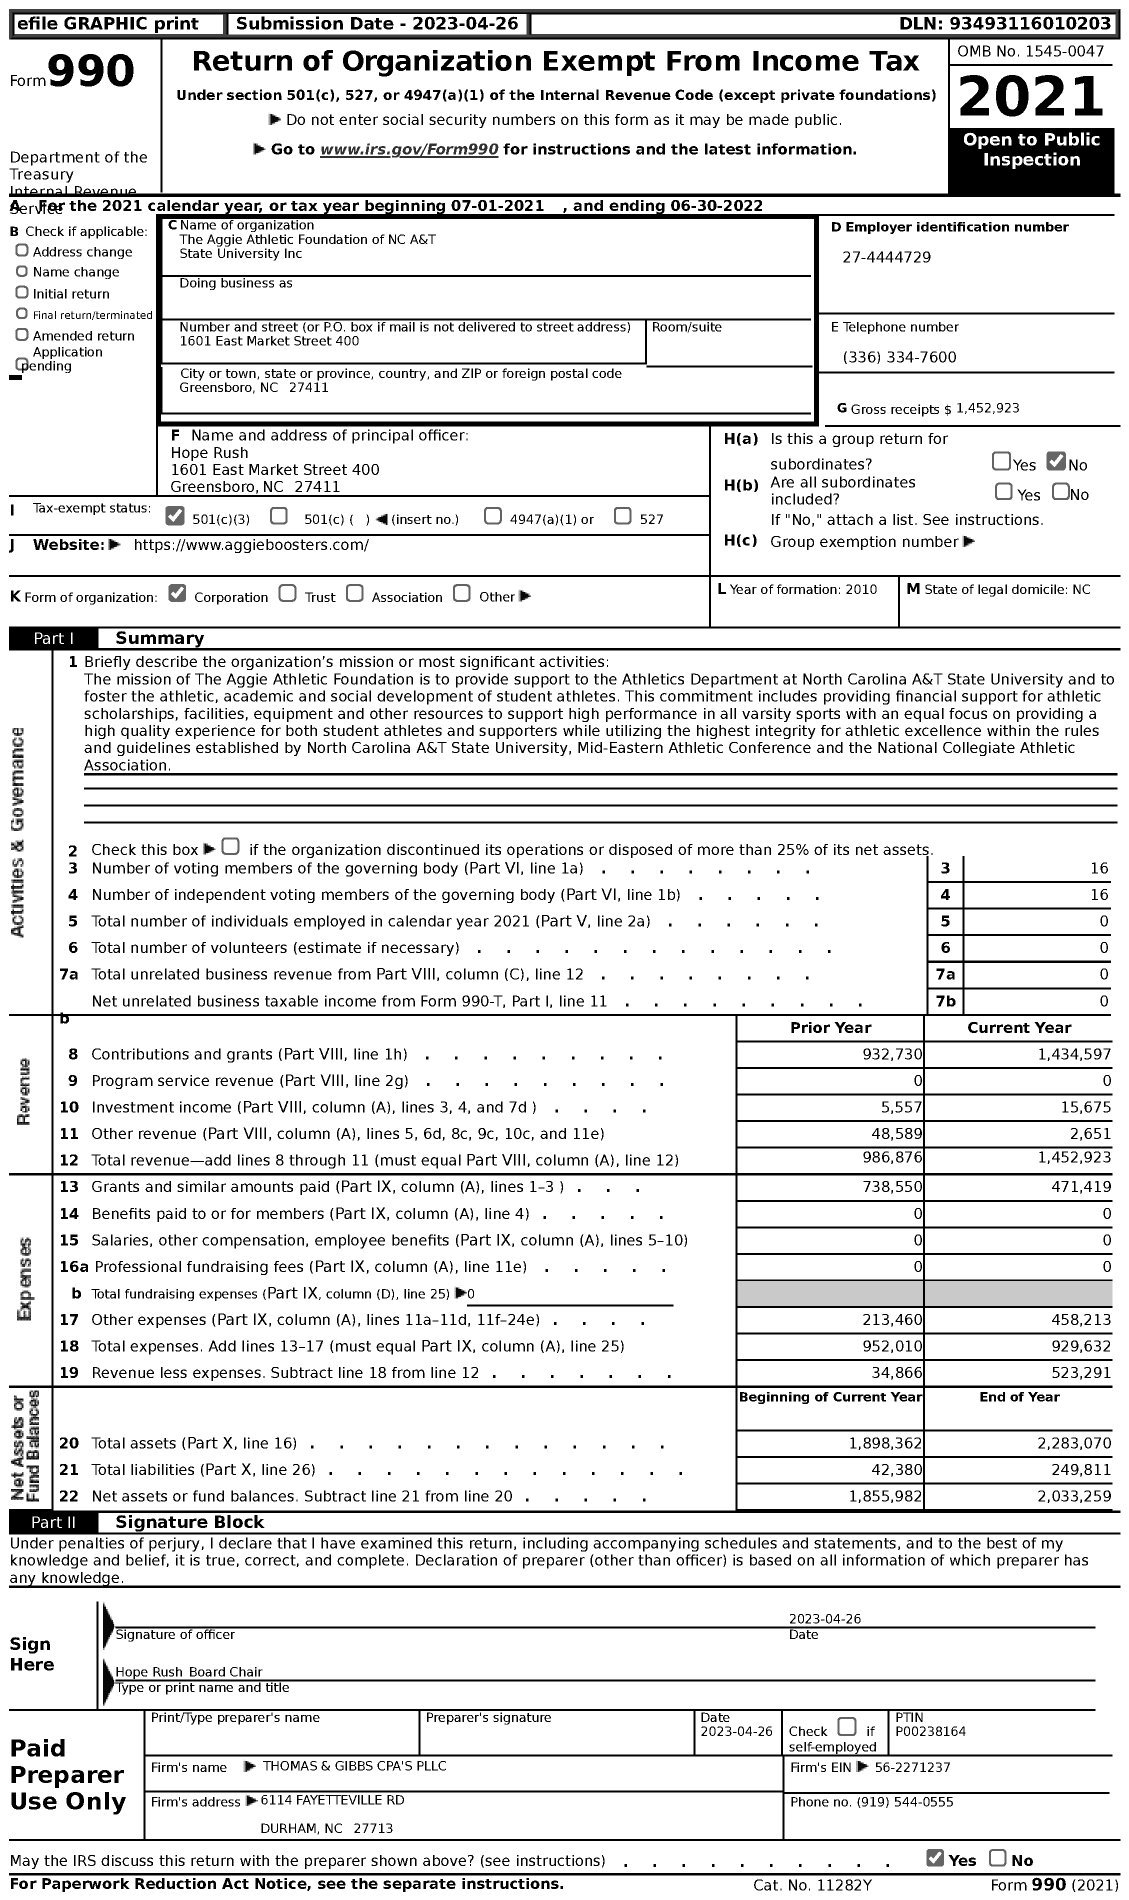 Image of first page of 2021 Form 990 for The Aggie Athletic Foundation of NC A&T State University